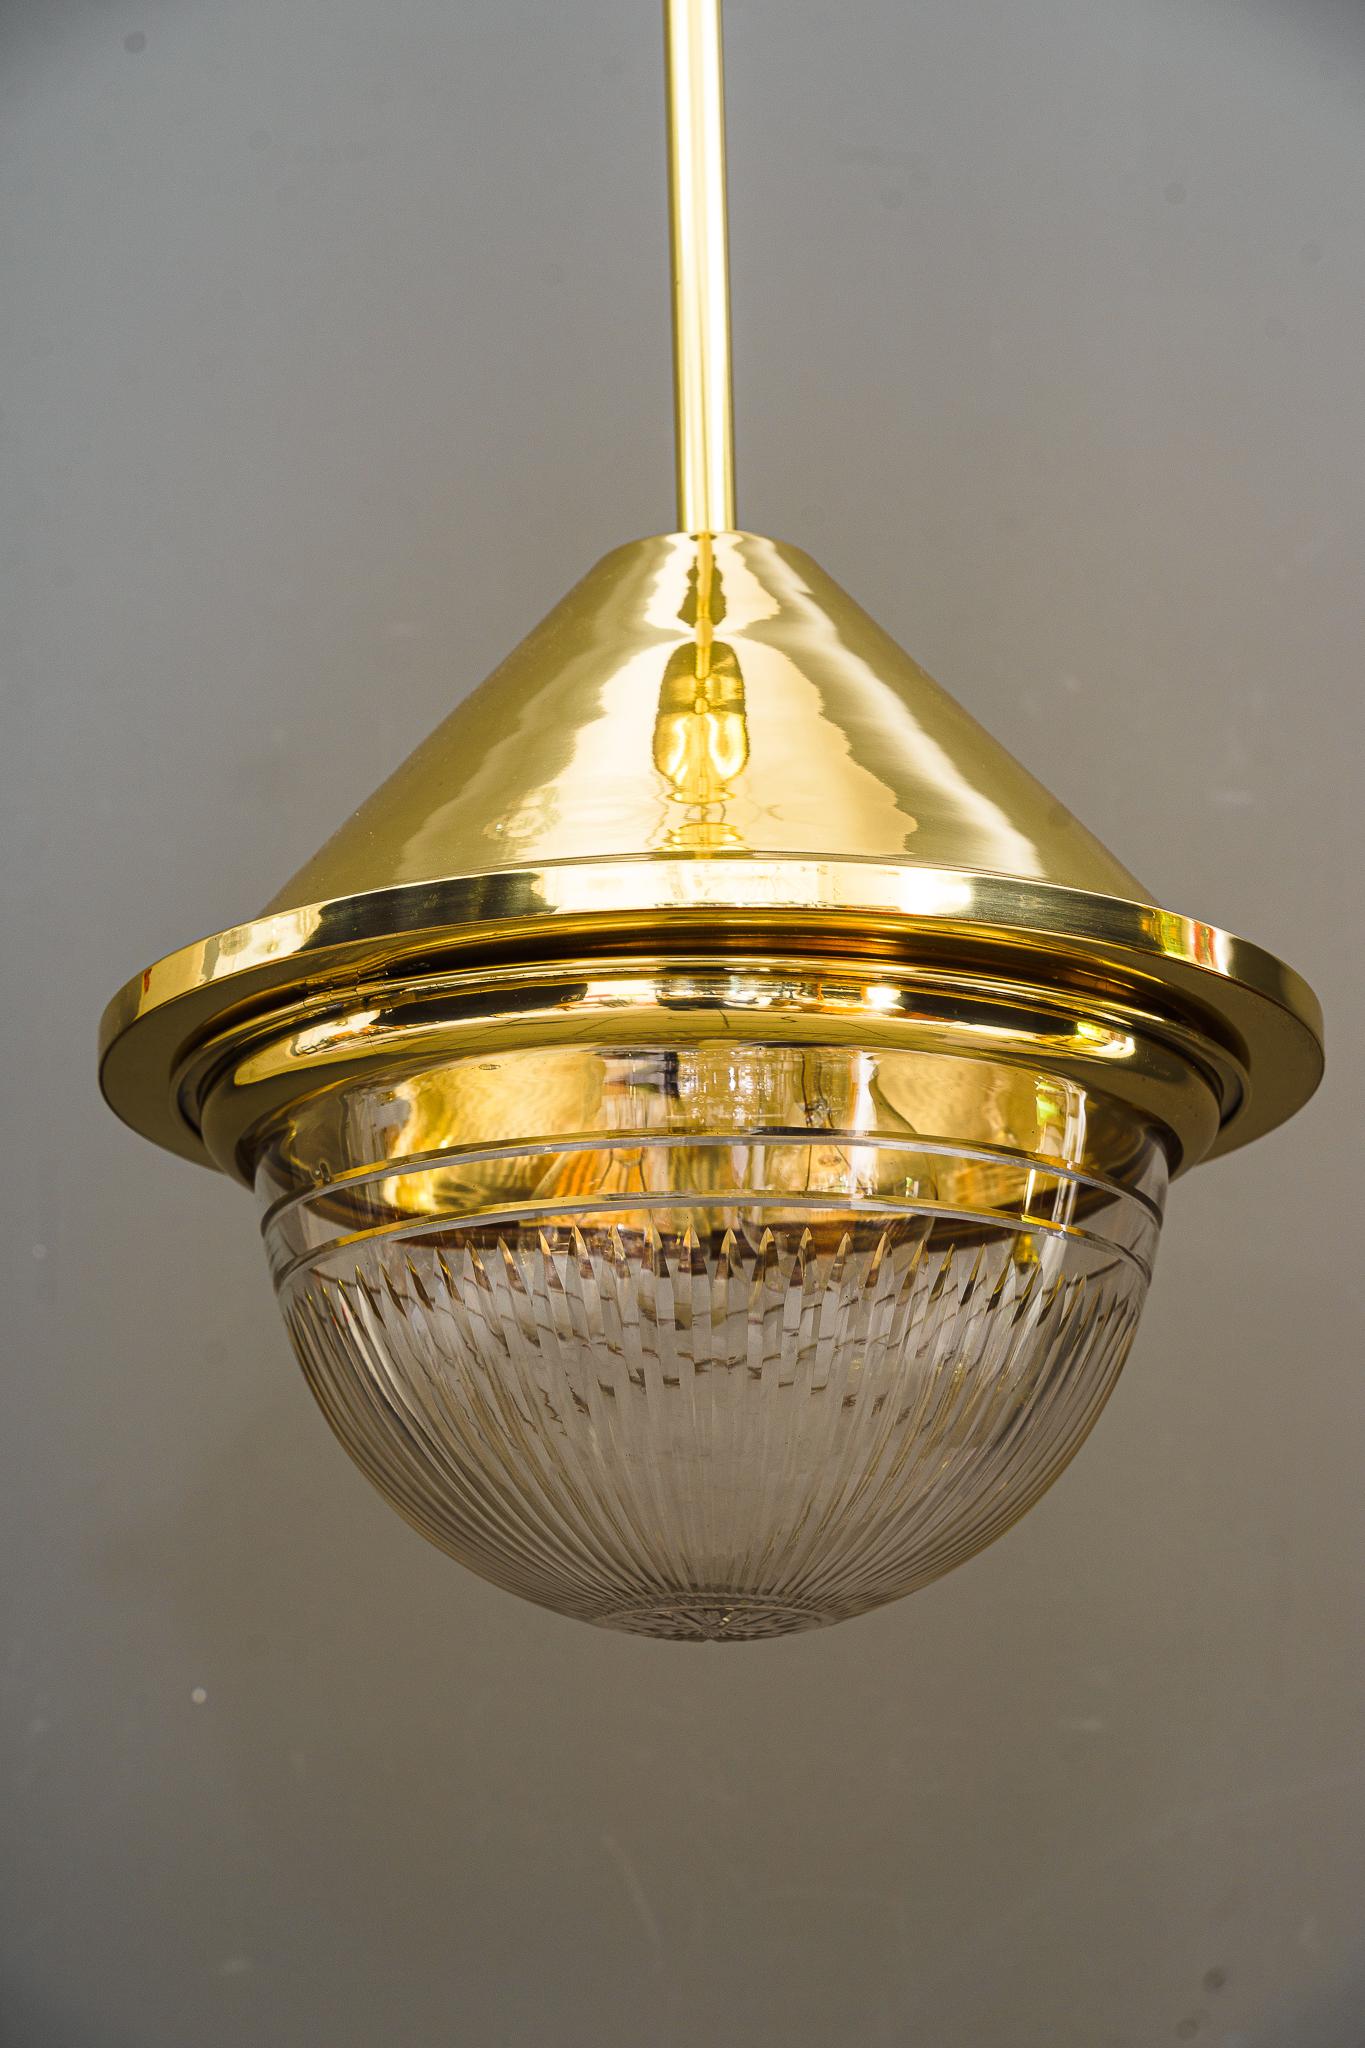 Art Deco pendant vienna with original cut glass shade, circa 1920
Brass polished and stove enameled
Original glass shade
The glass part can be openen for bulb changes.